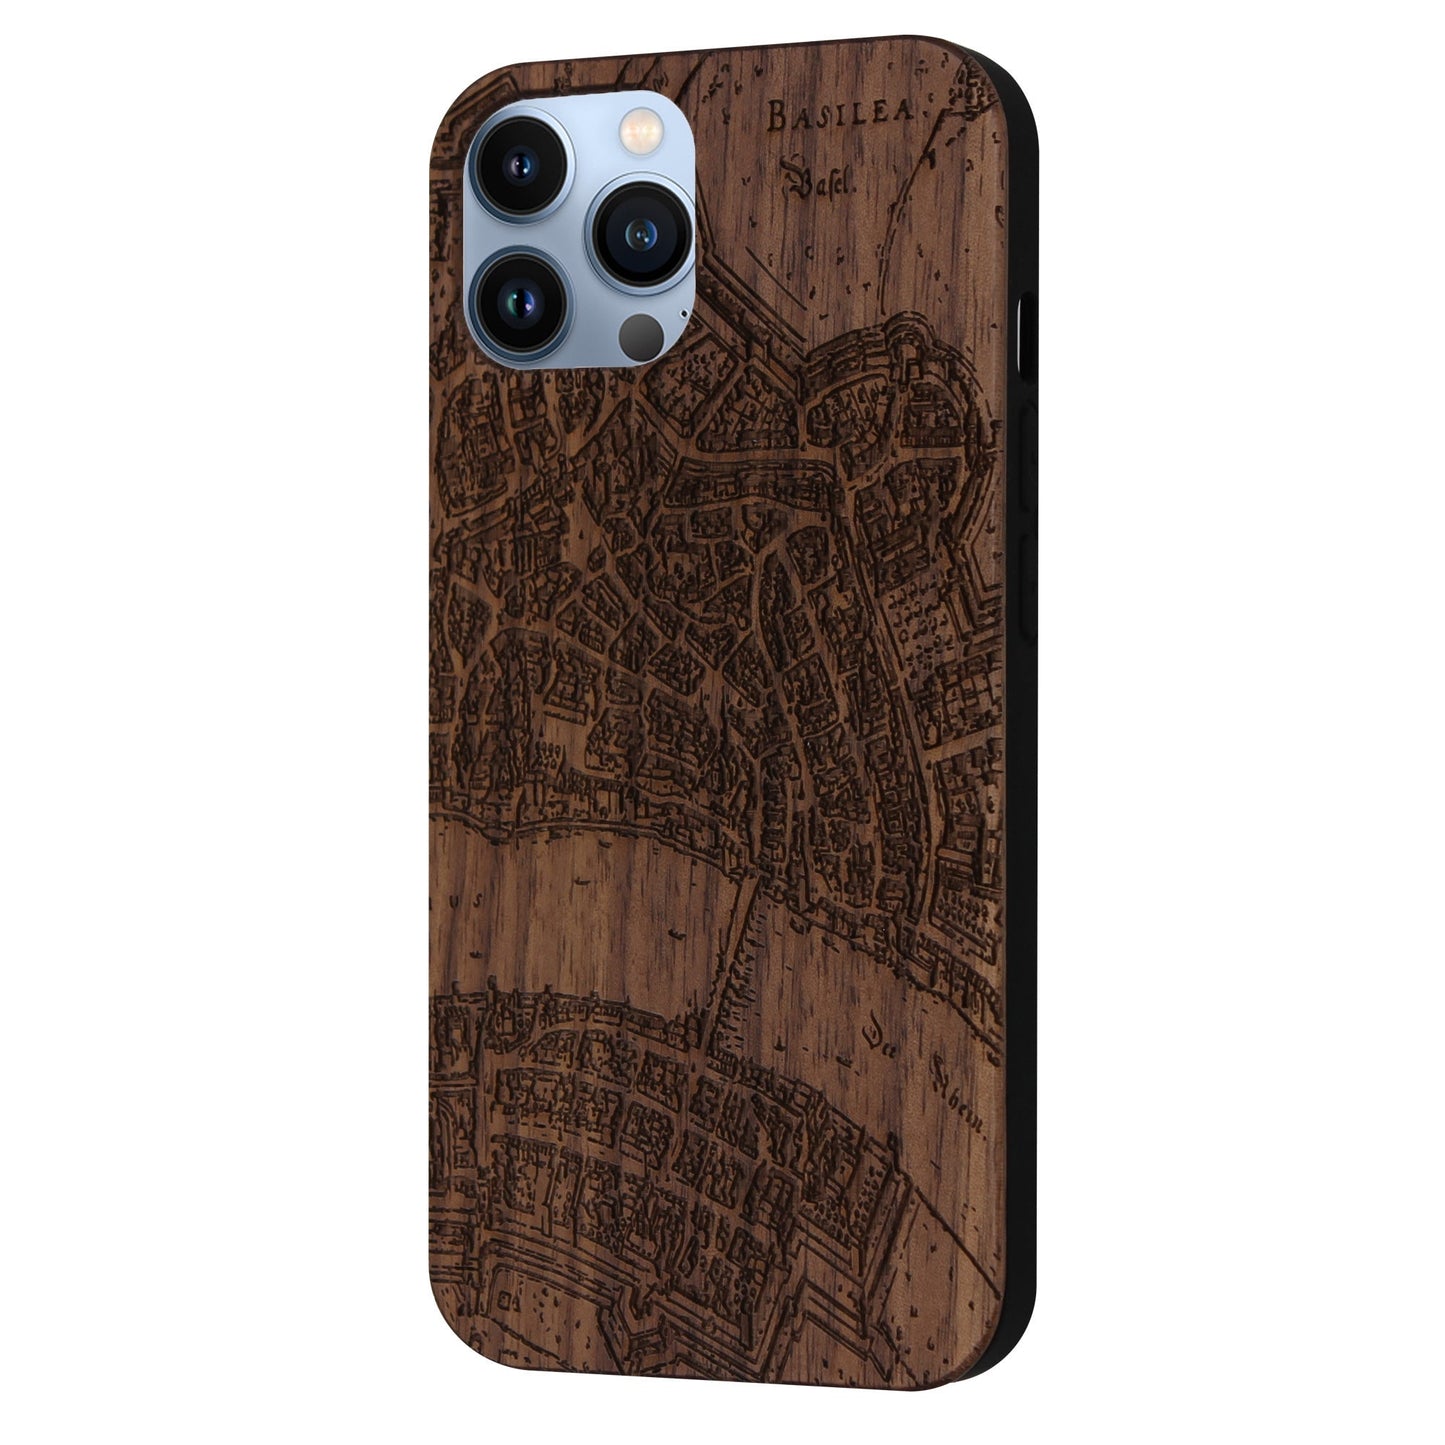 Basel Merian Eden case made of walnut wood for iPhone 14 Pro Max